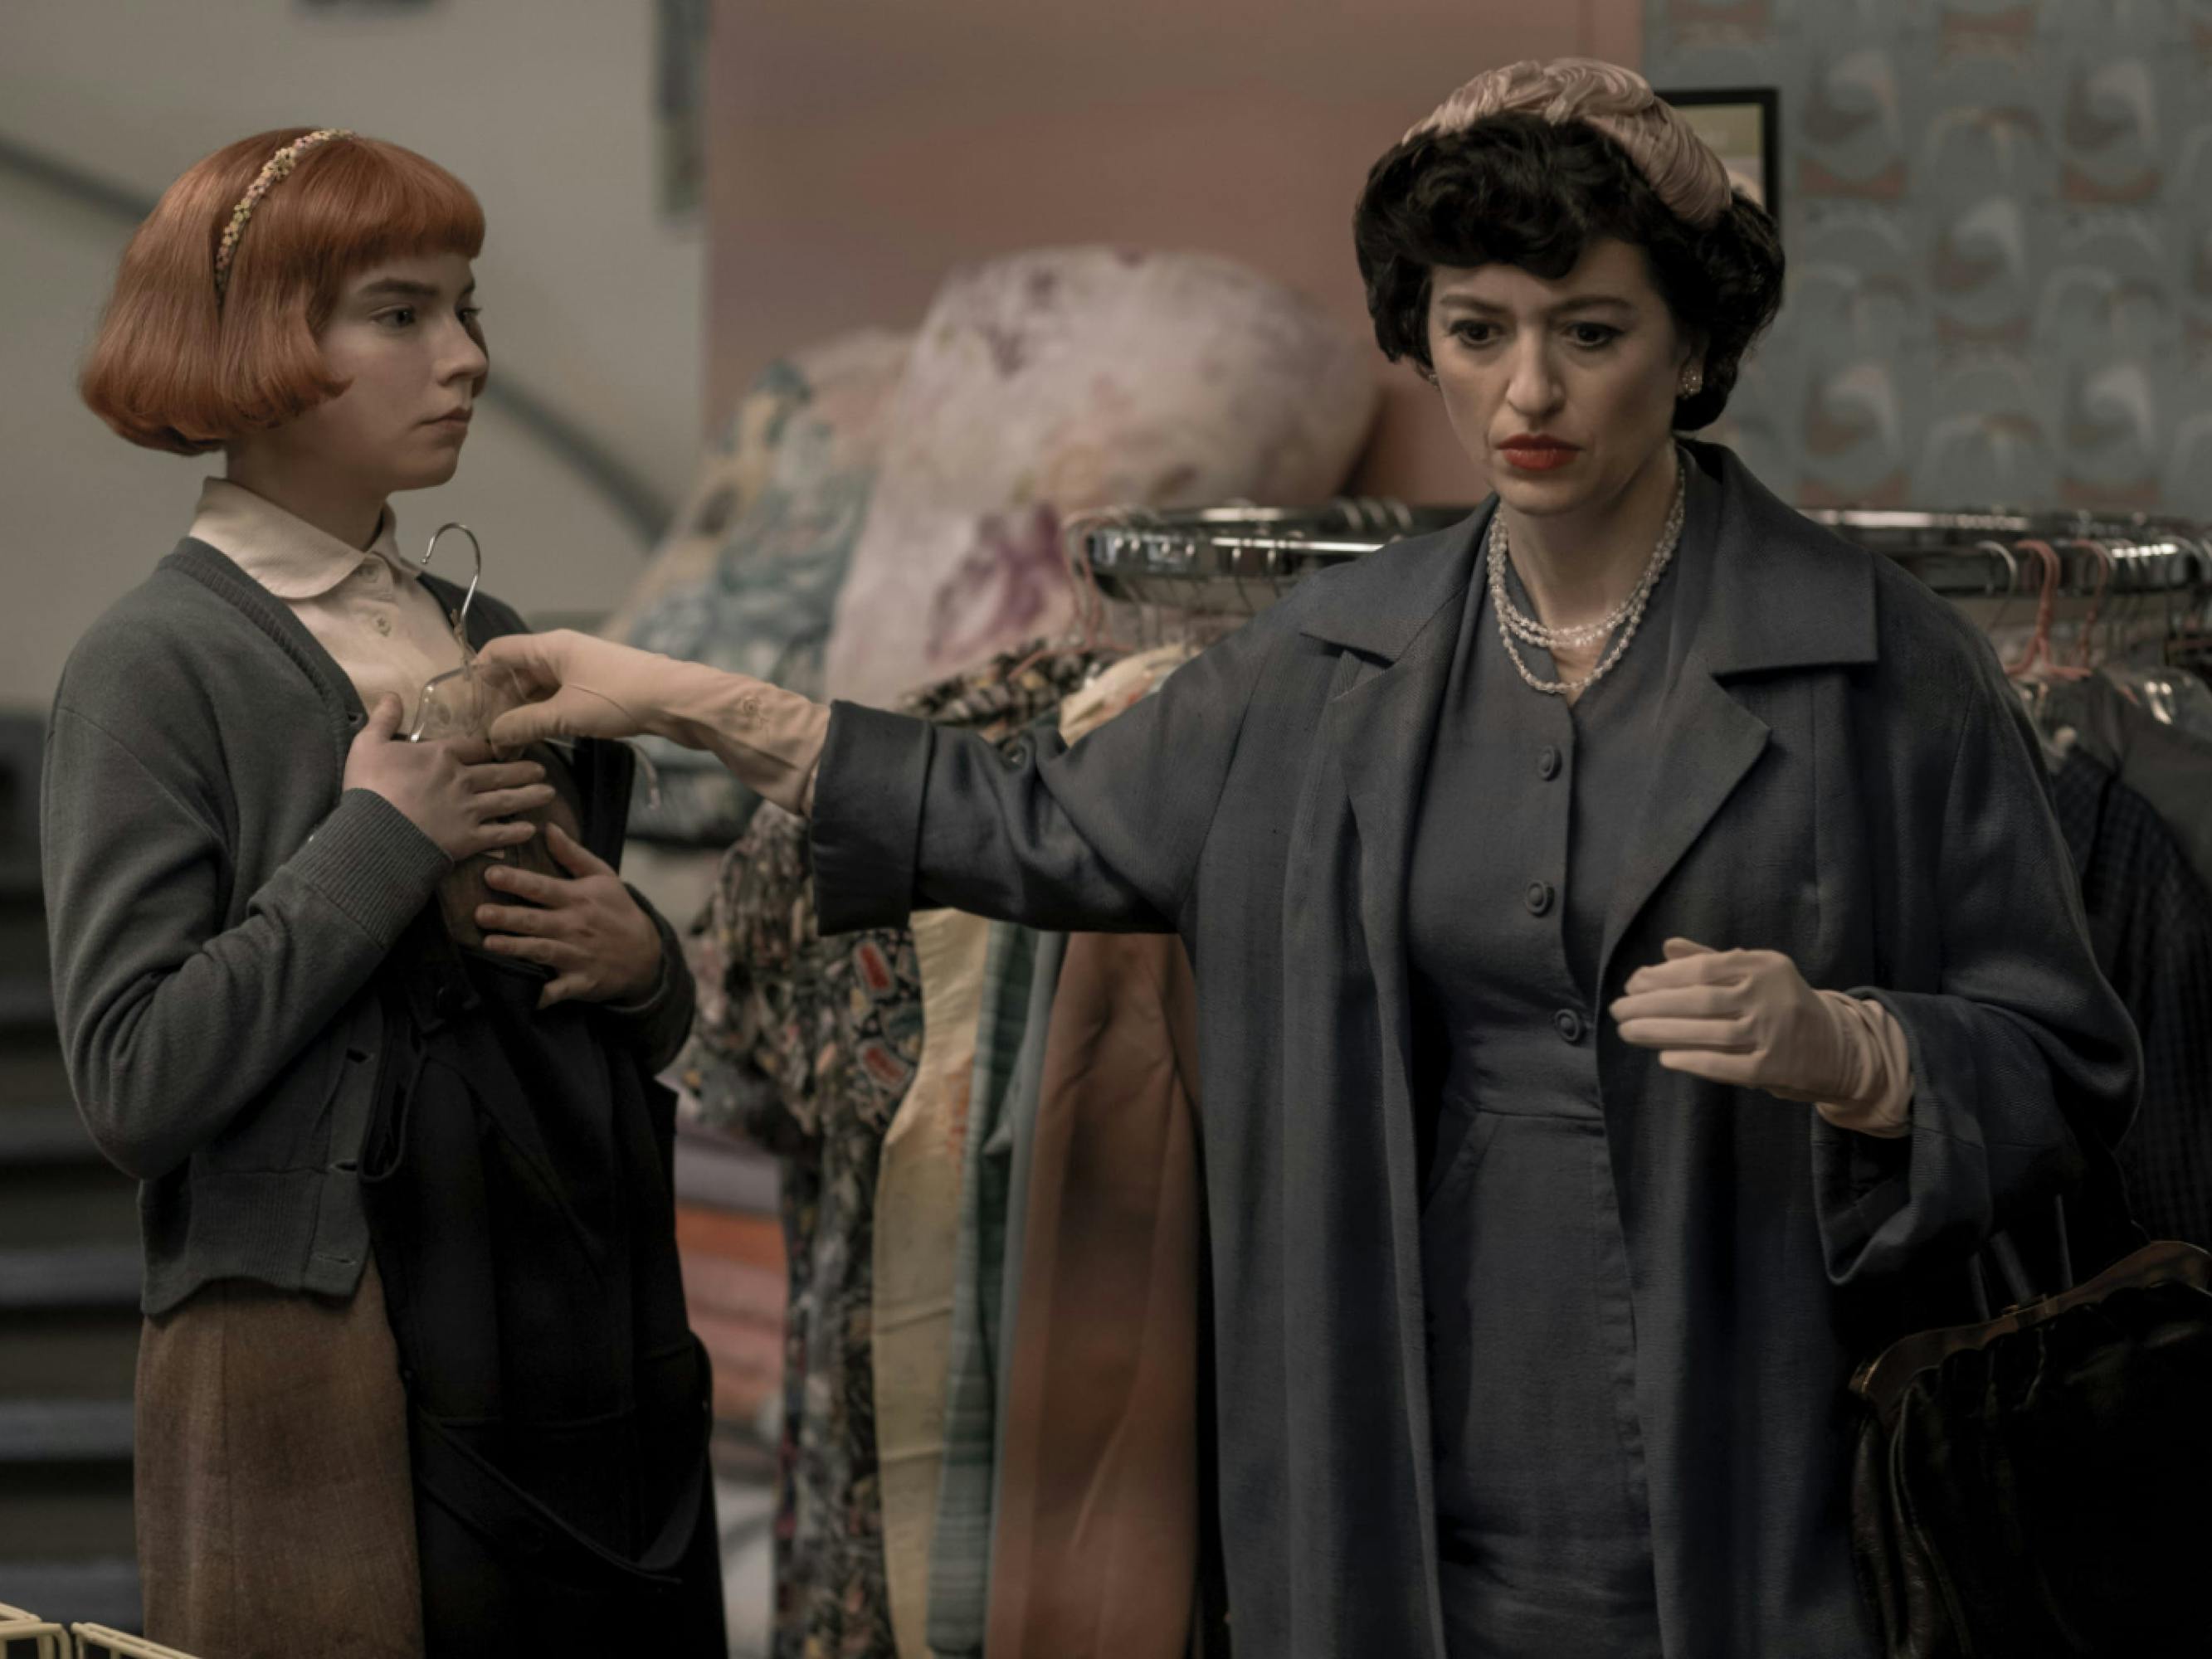 Alma Wheatley, played by Marielle Heller, holds up a dress to her adoptive daughter Beth, played by Anya Taylor-Joy. Beth has a short red bob haircut and is wearing a gray sweater. Alma is in an all gray outfit with a pearl necklace and a pink hair bow. They are standing in front of a clothing rack in a store.